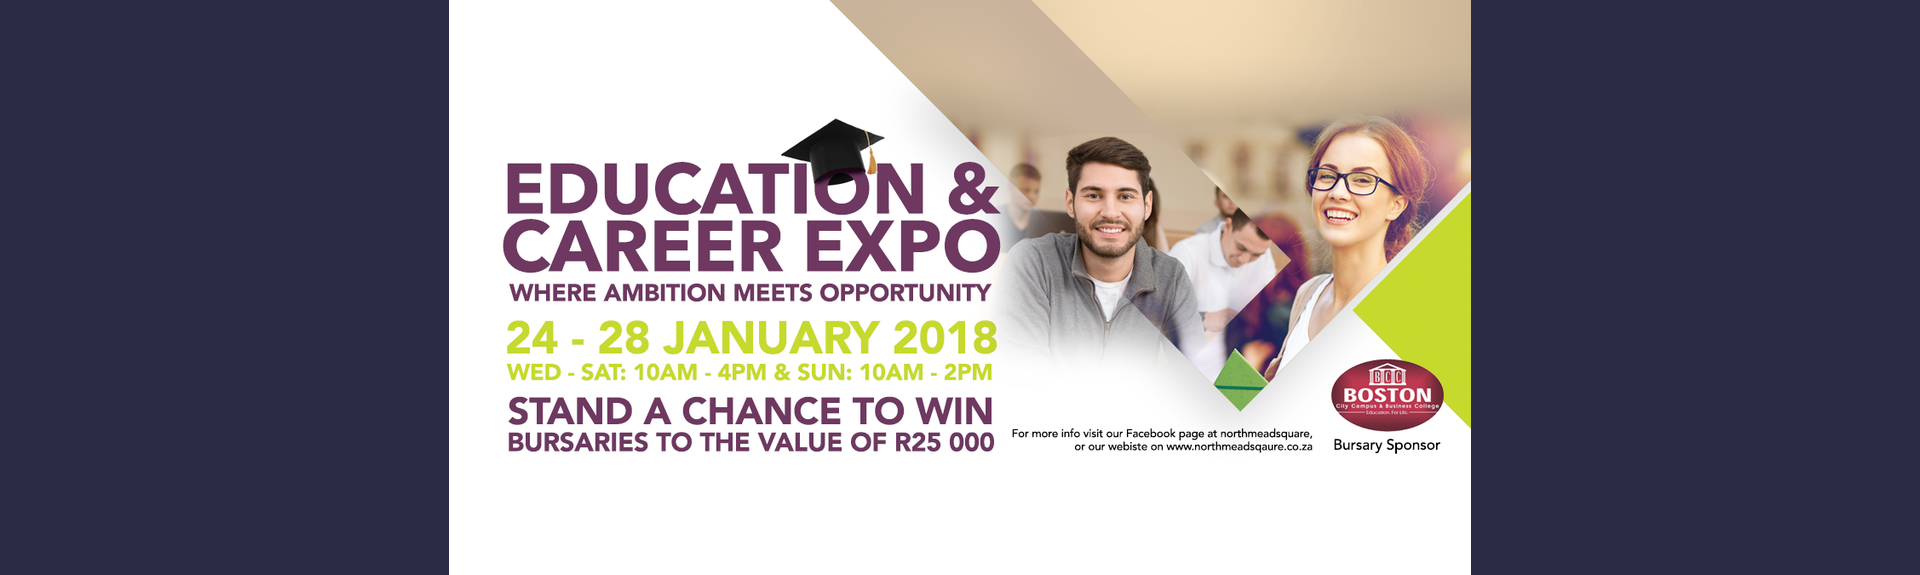 Education and Career Expo